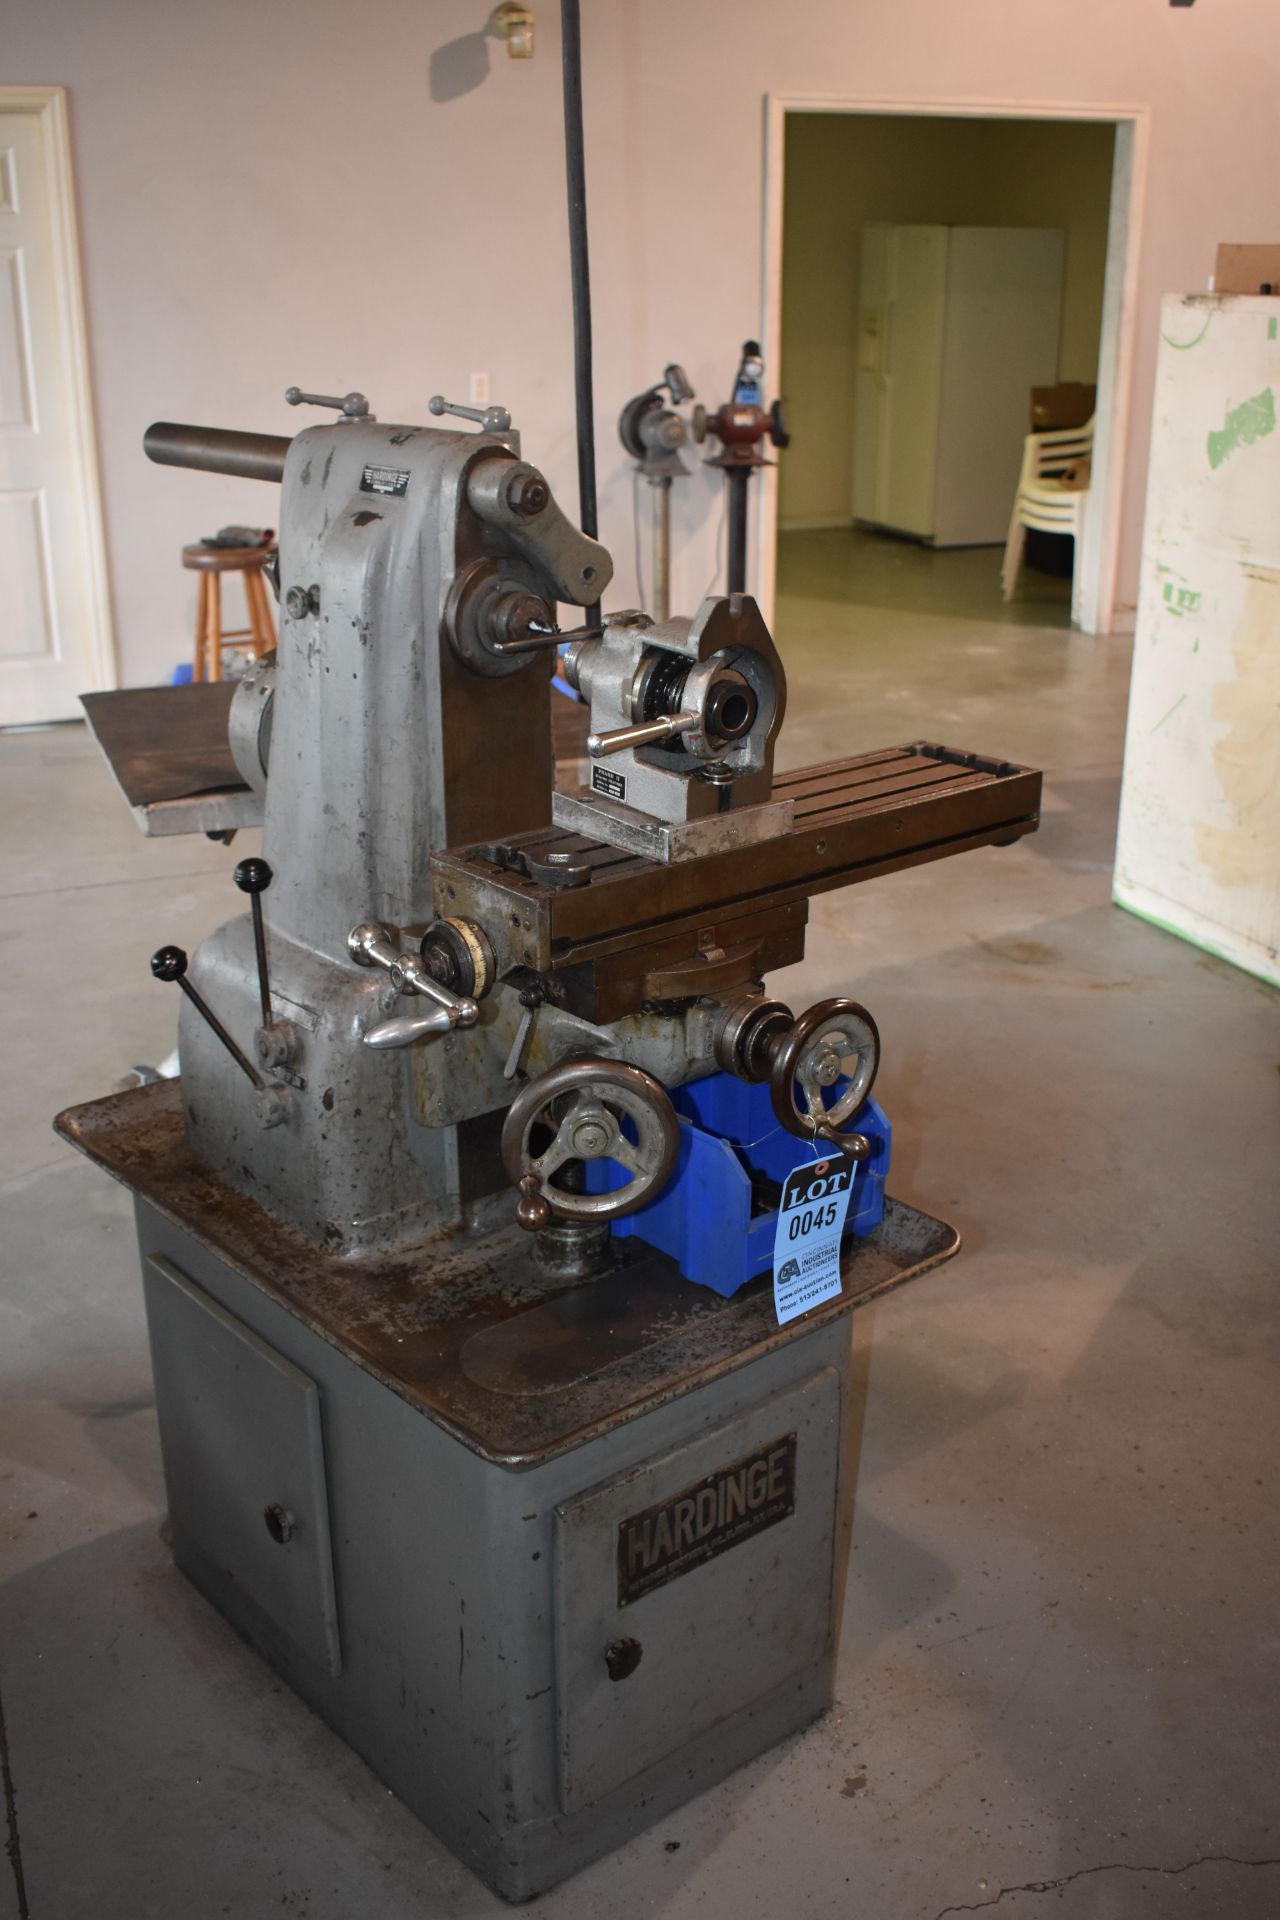 HARDINGE HORIZONTAL MILL WITH COLLET HOLDER, 24" X 6" TABLE, OVER AR SUPPORT - Image 2 of 2